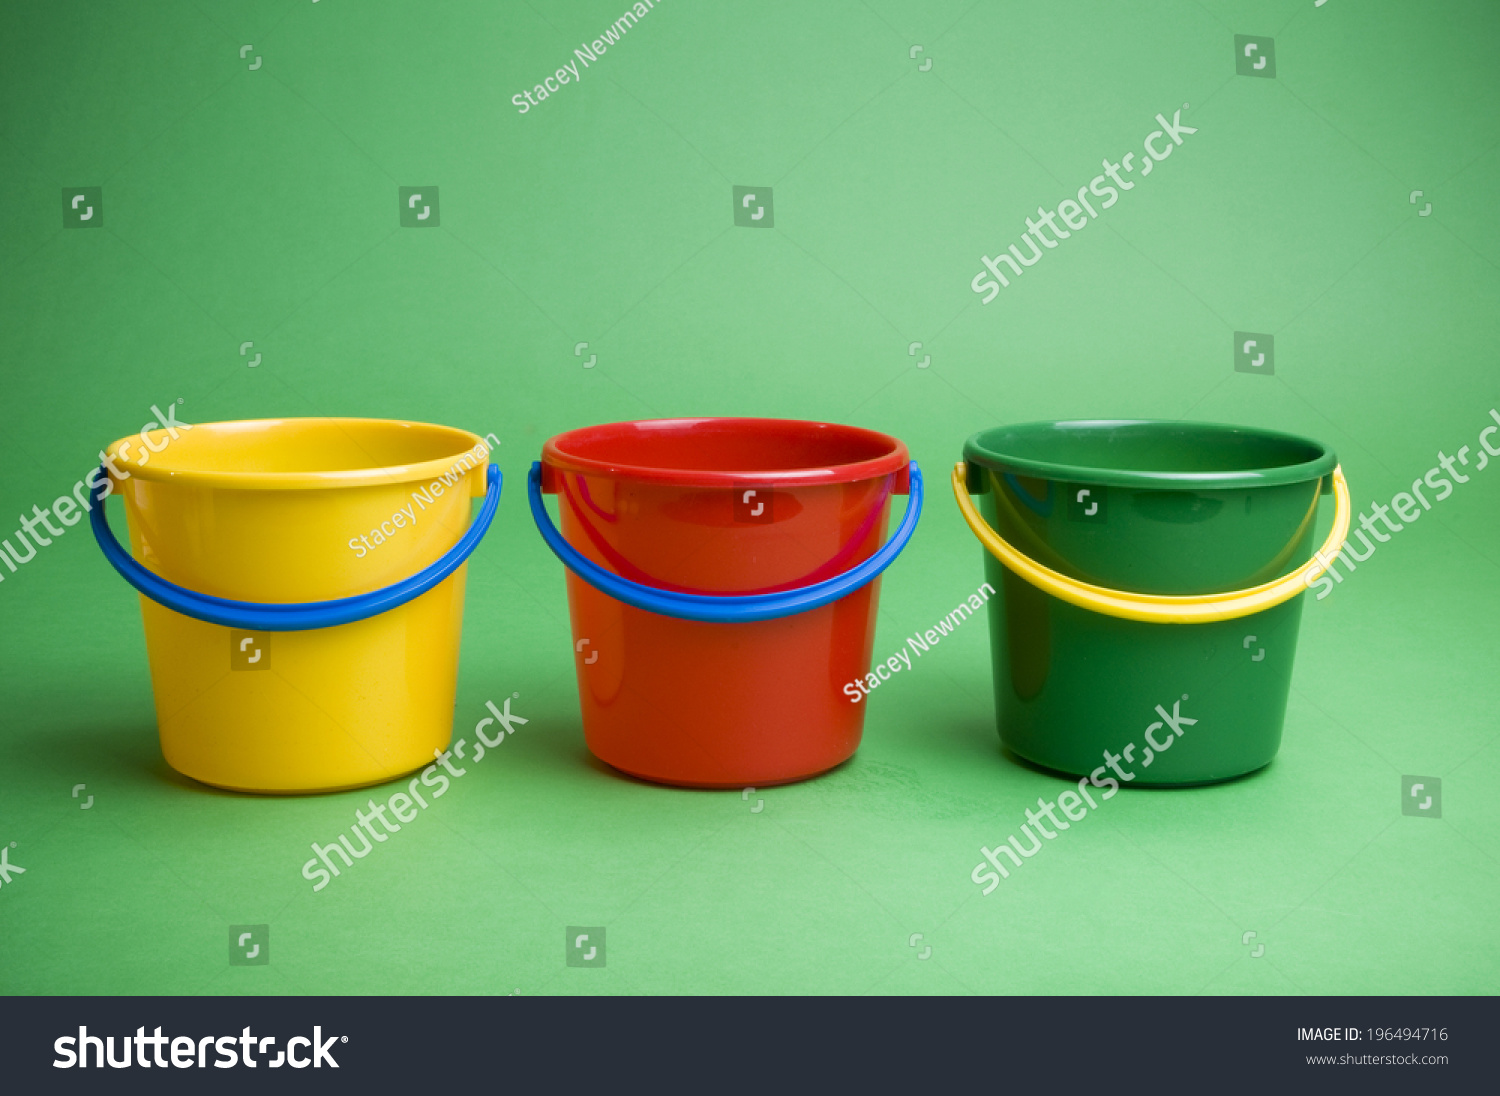 Download Three Plastic Buckets Yellow Red Green Royalty Free Stock Image PSD Mockup Templates